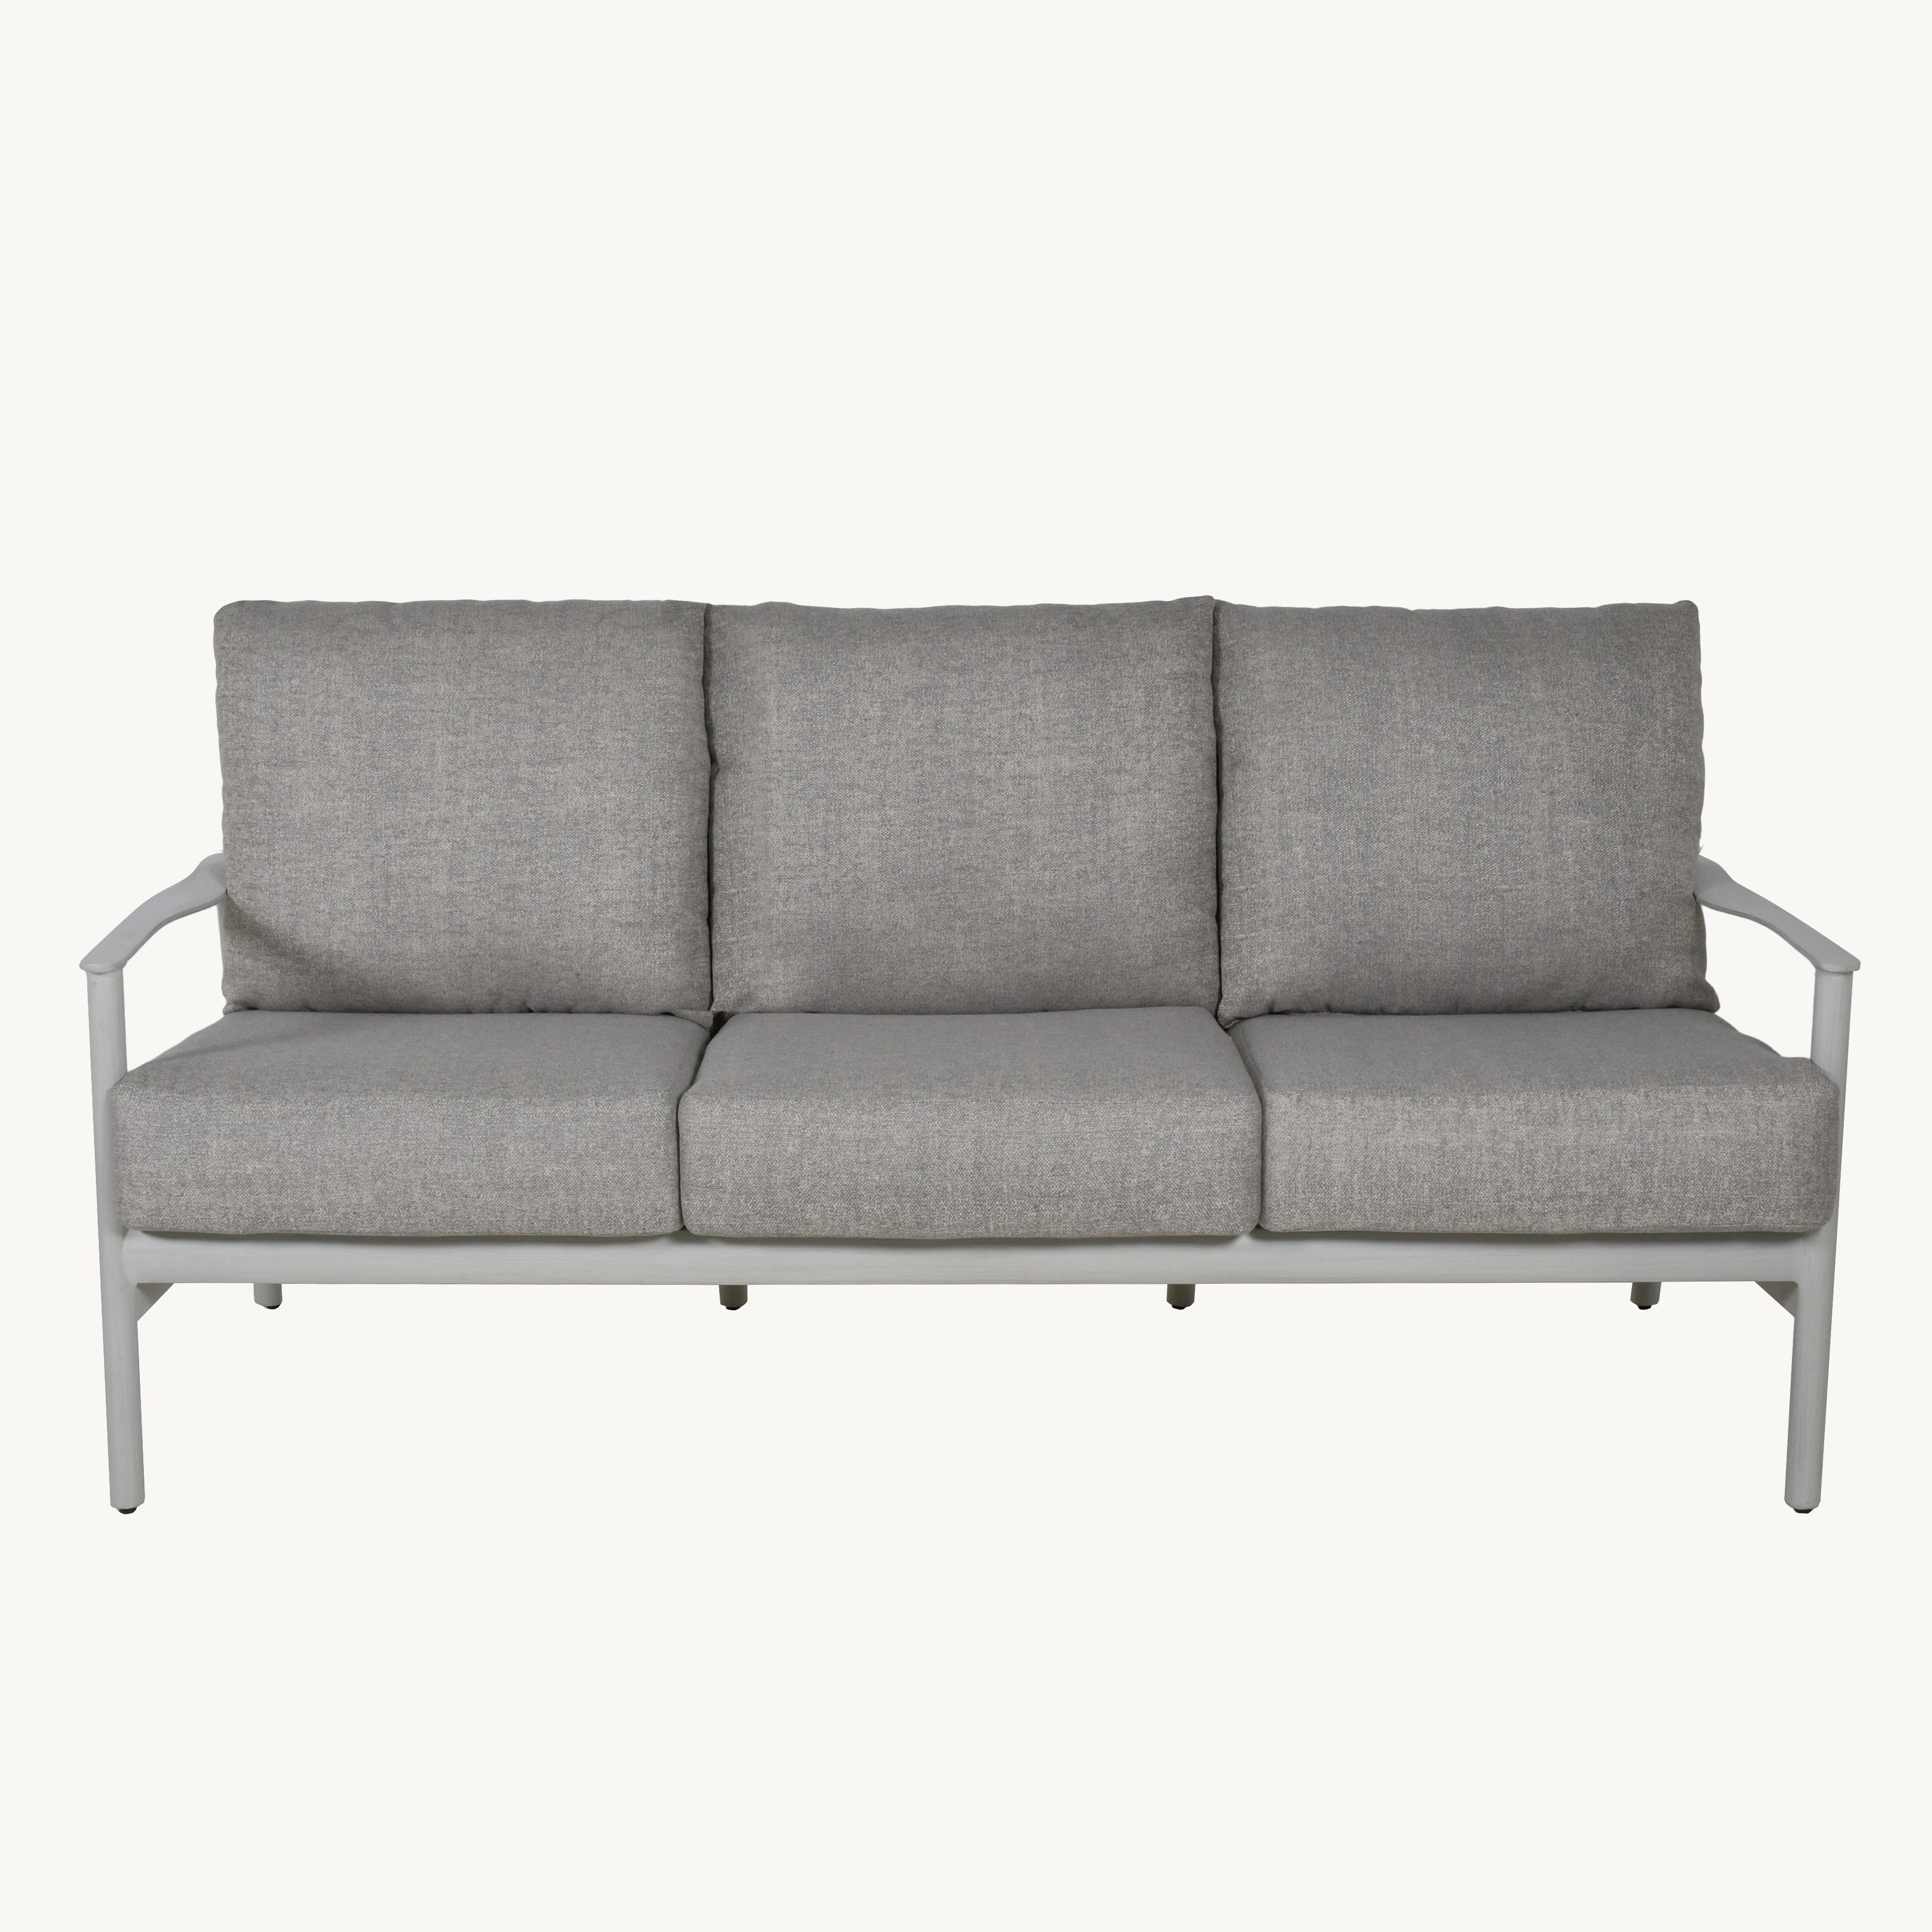 Barbados Cushion Lounge Sofa By Castelle